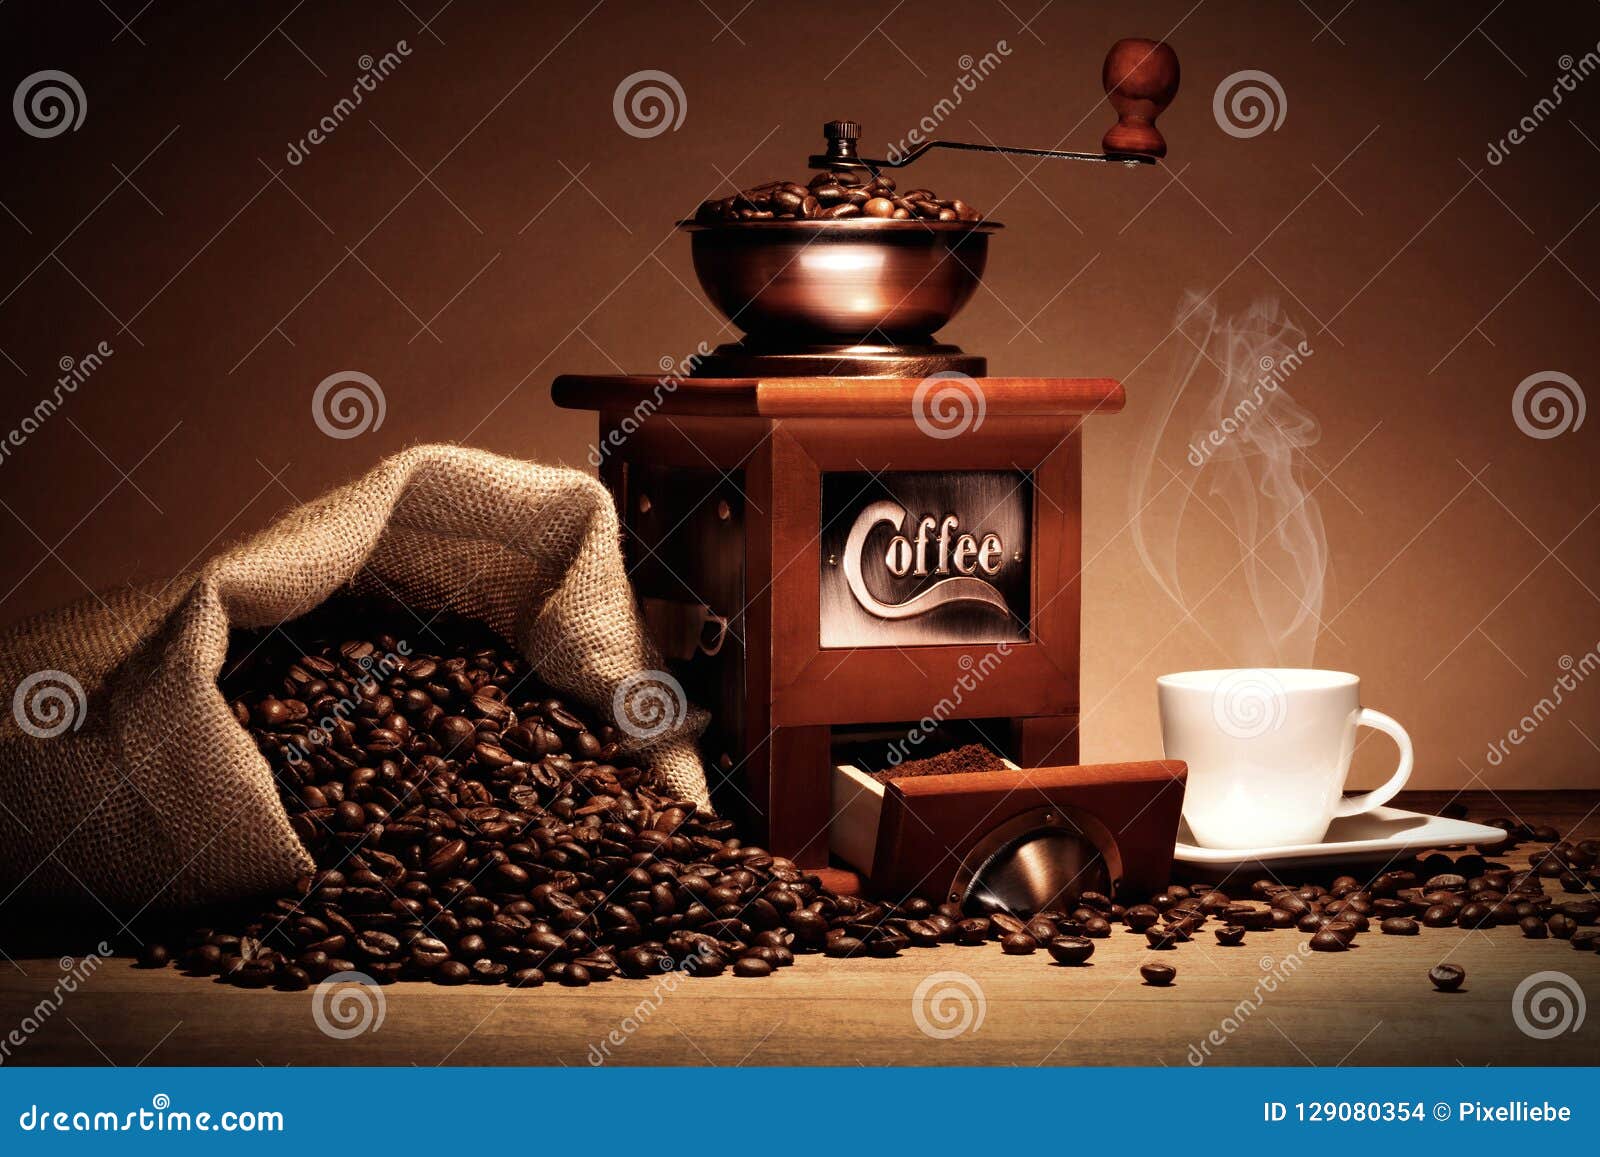 Coffee Grinder with Coffee Bag. Espresso Cup and Coffee Beans Stock Photo -  Image of life, wooden: 129080354